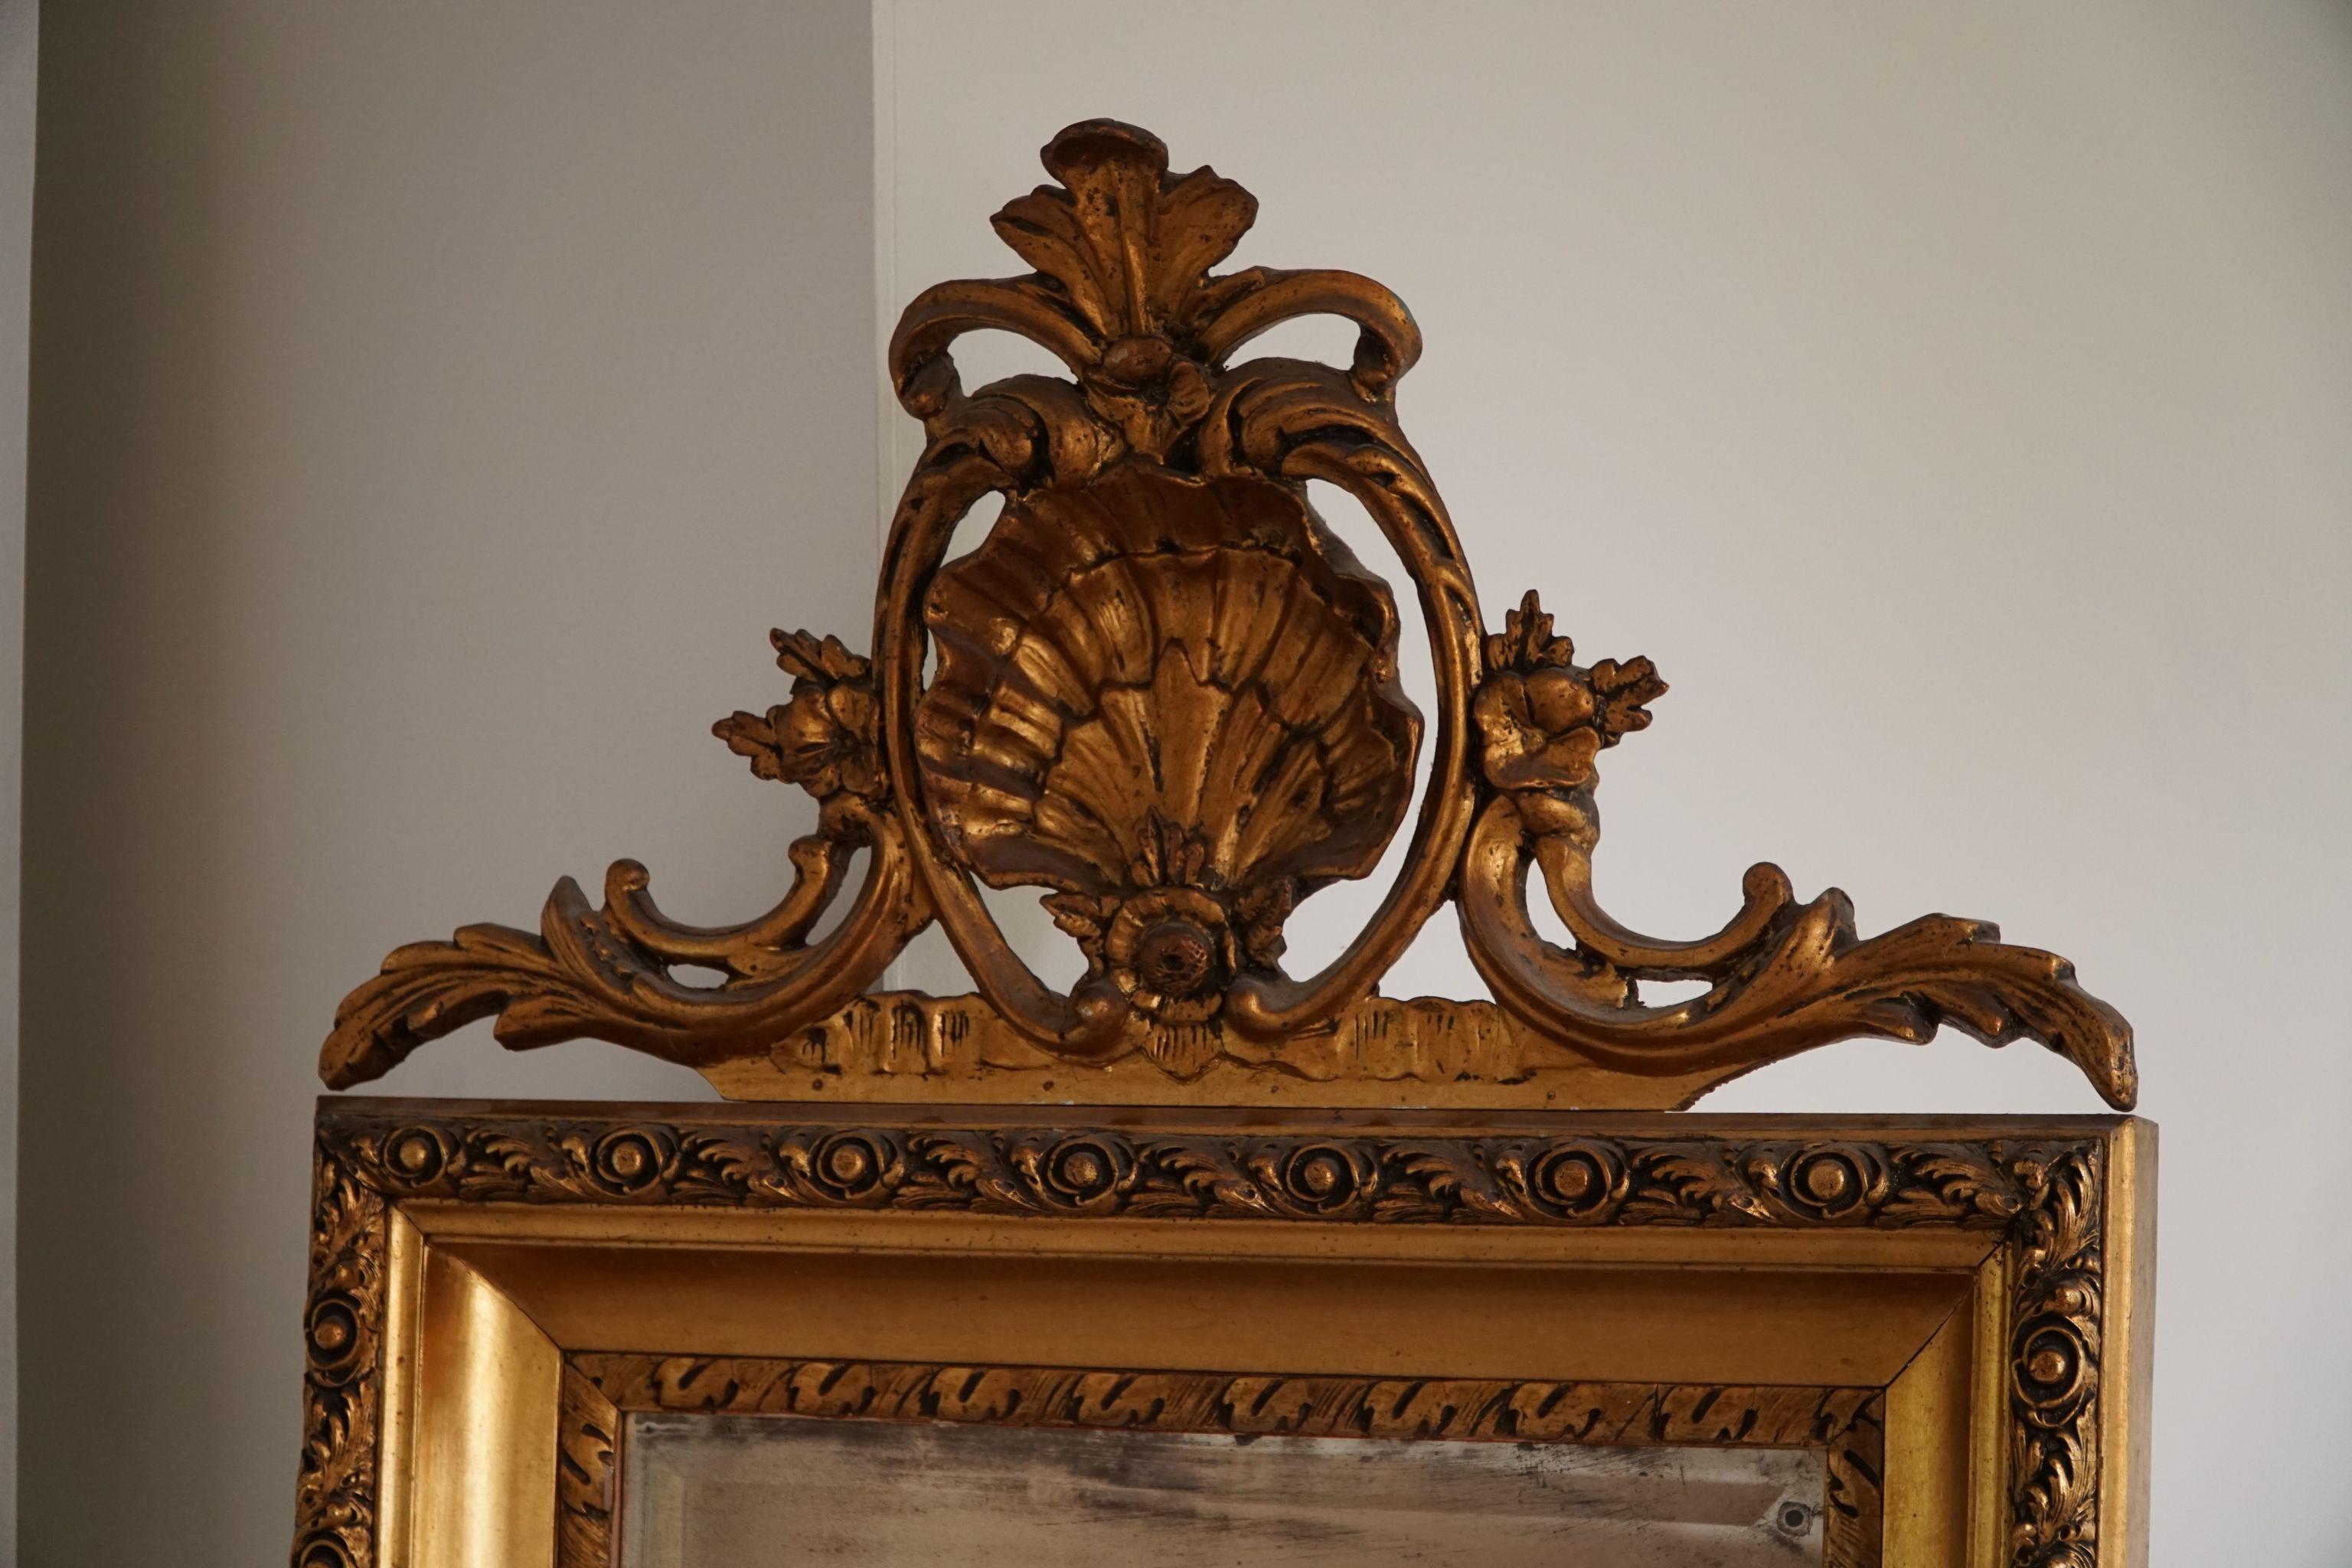 Antique Danish Mid-19th Century Rococo Gold Plated Mirror For Sale 4